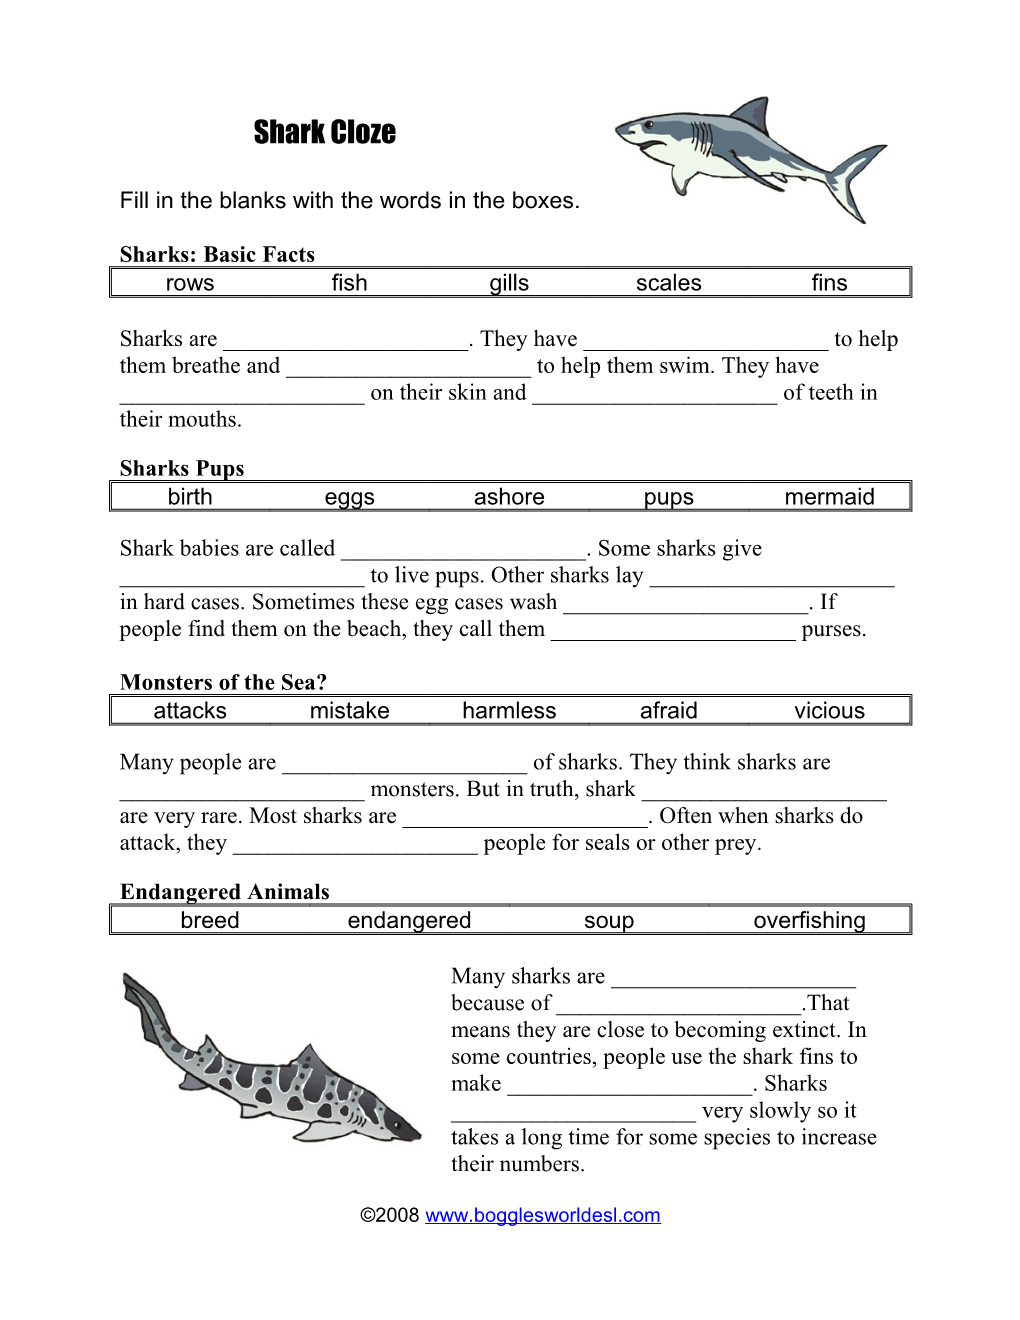 Shark Cloze Fill in the Blanks with the Words in the Boxes